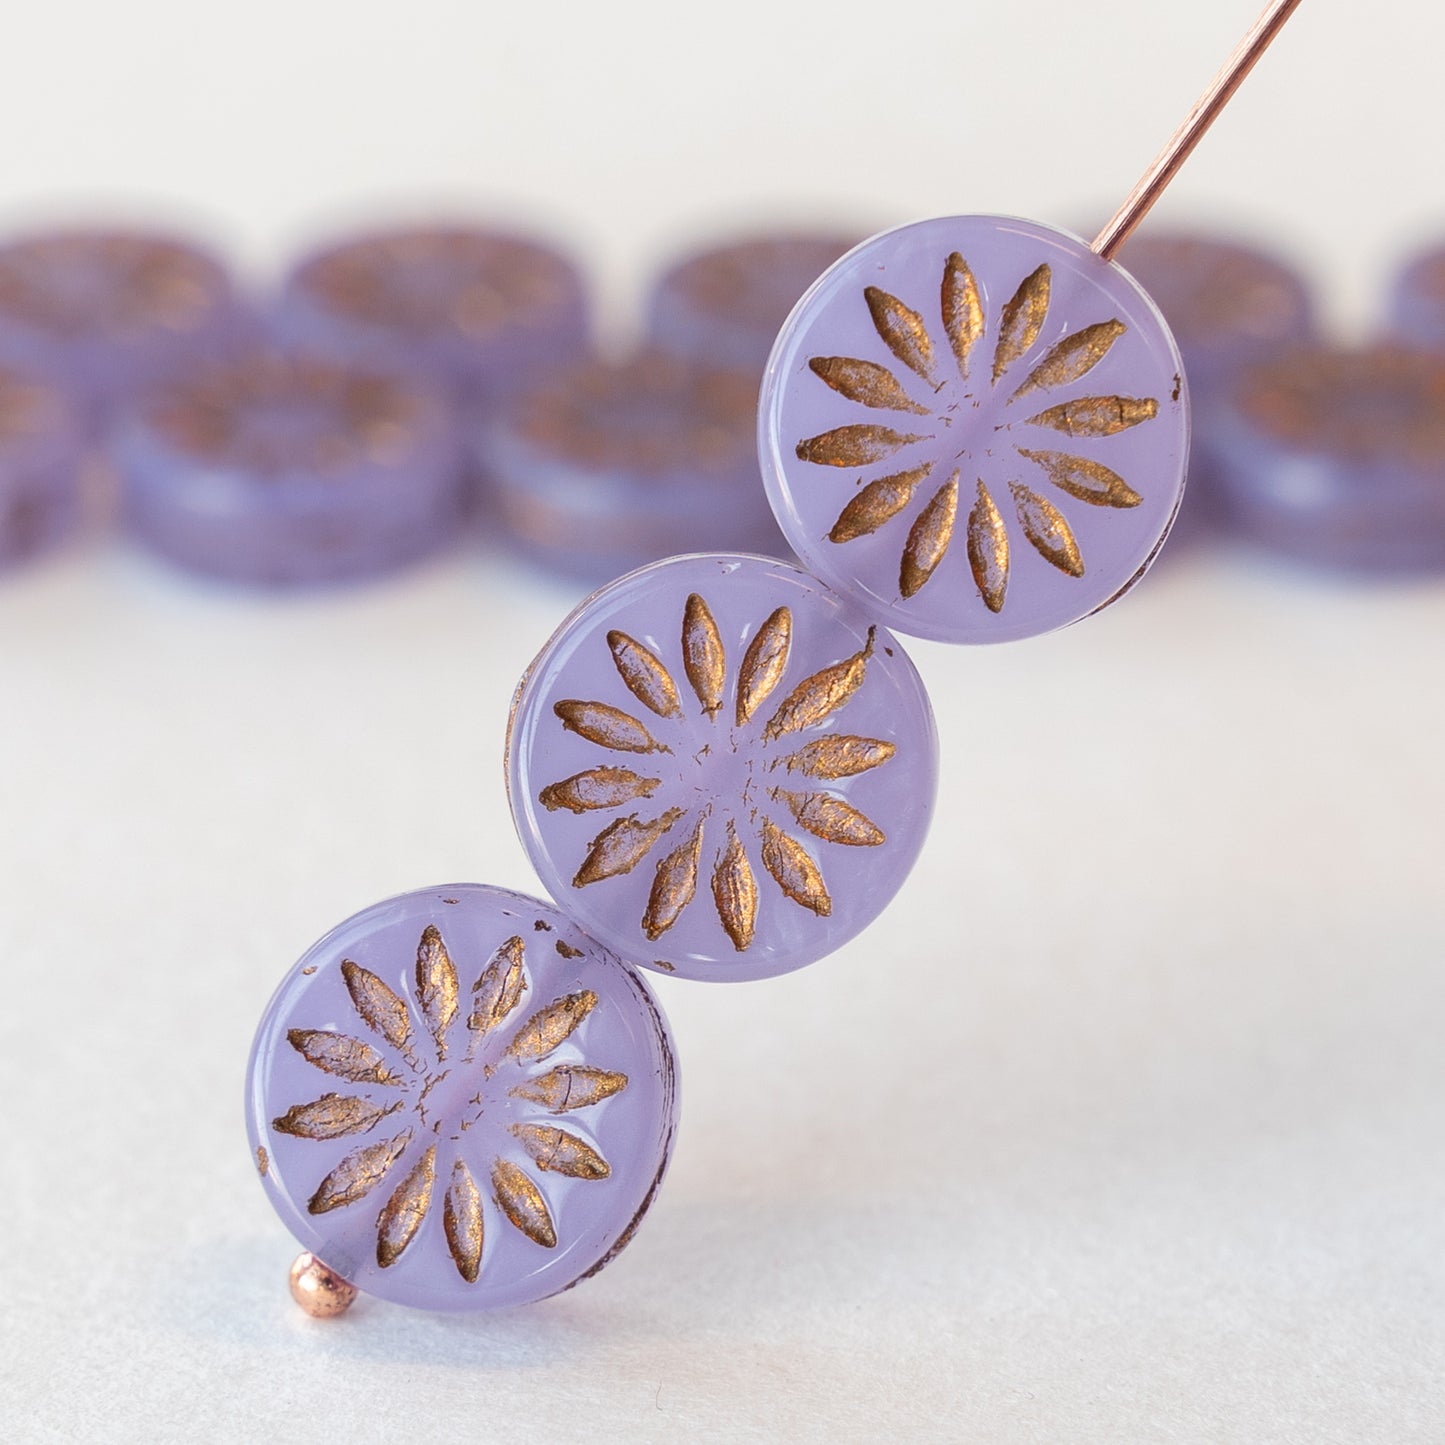 12mm Coin Beads - Lavender Matte With Gold Wash - 15 Beads